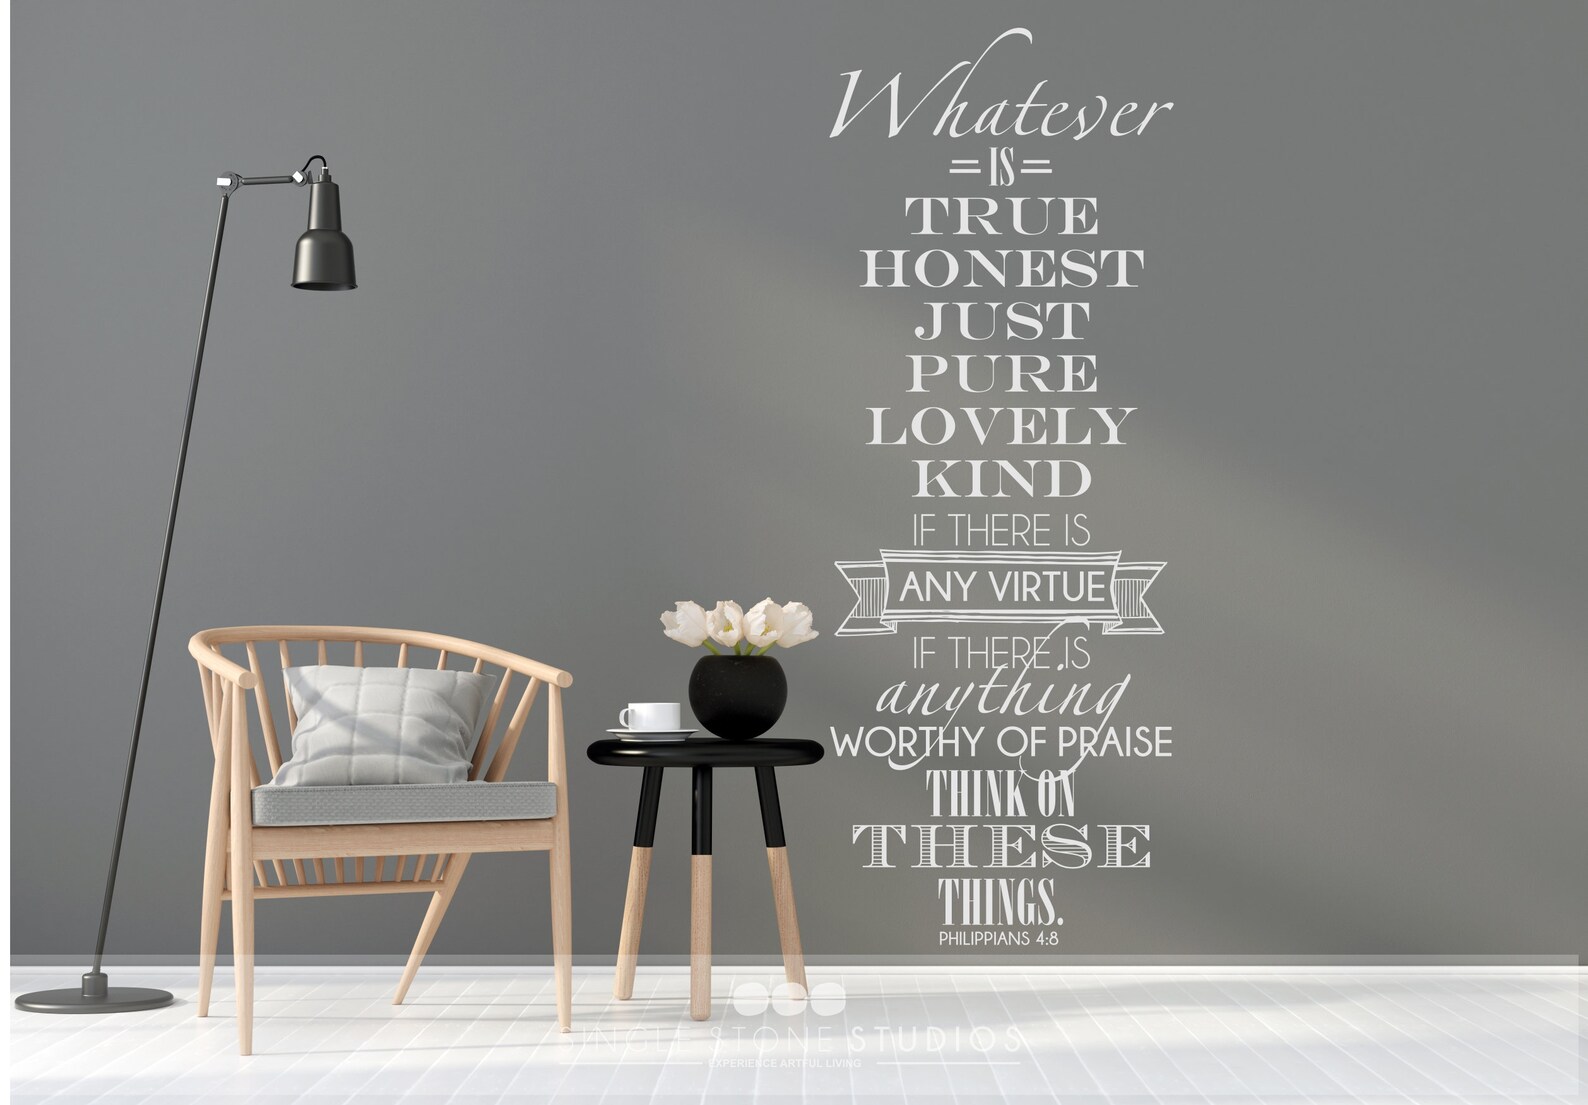 Bible Verse Wall Decal Whatever is True Philippians 4:8 - Etsy